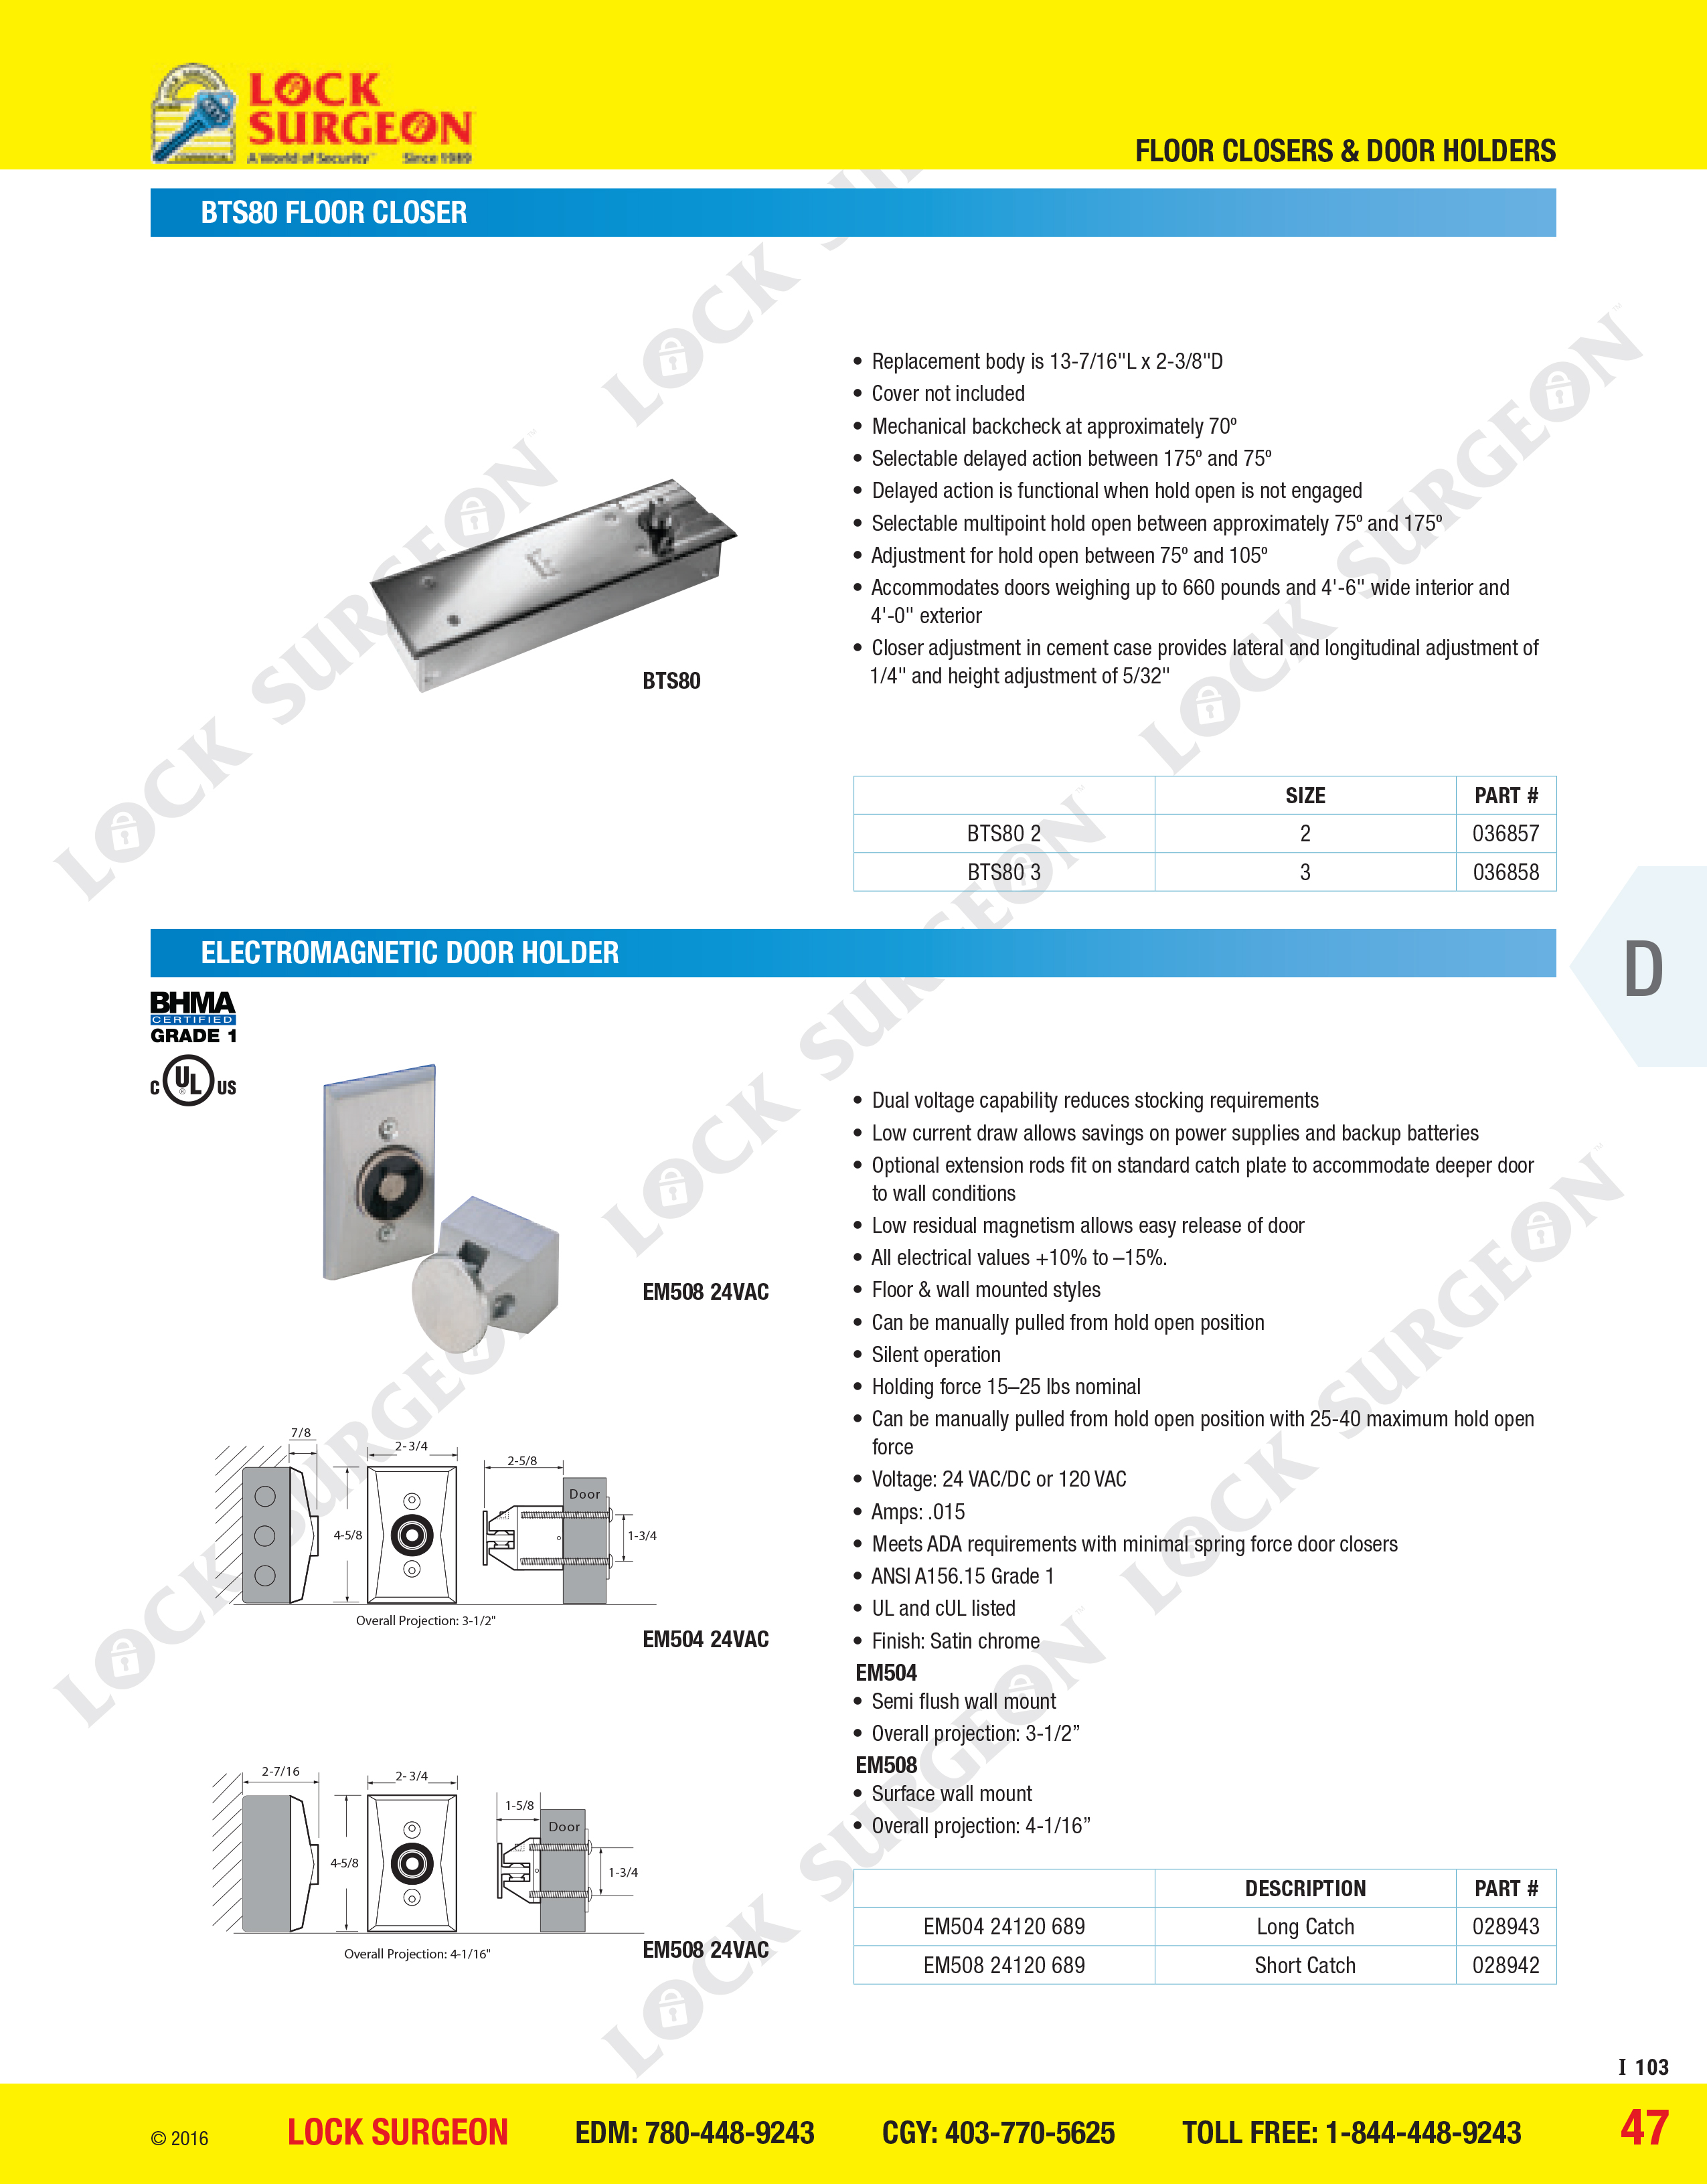 BTS80 Floor closer and Electromagnetic door holder with mechanical back-check at 70-inches